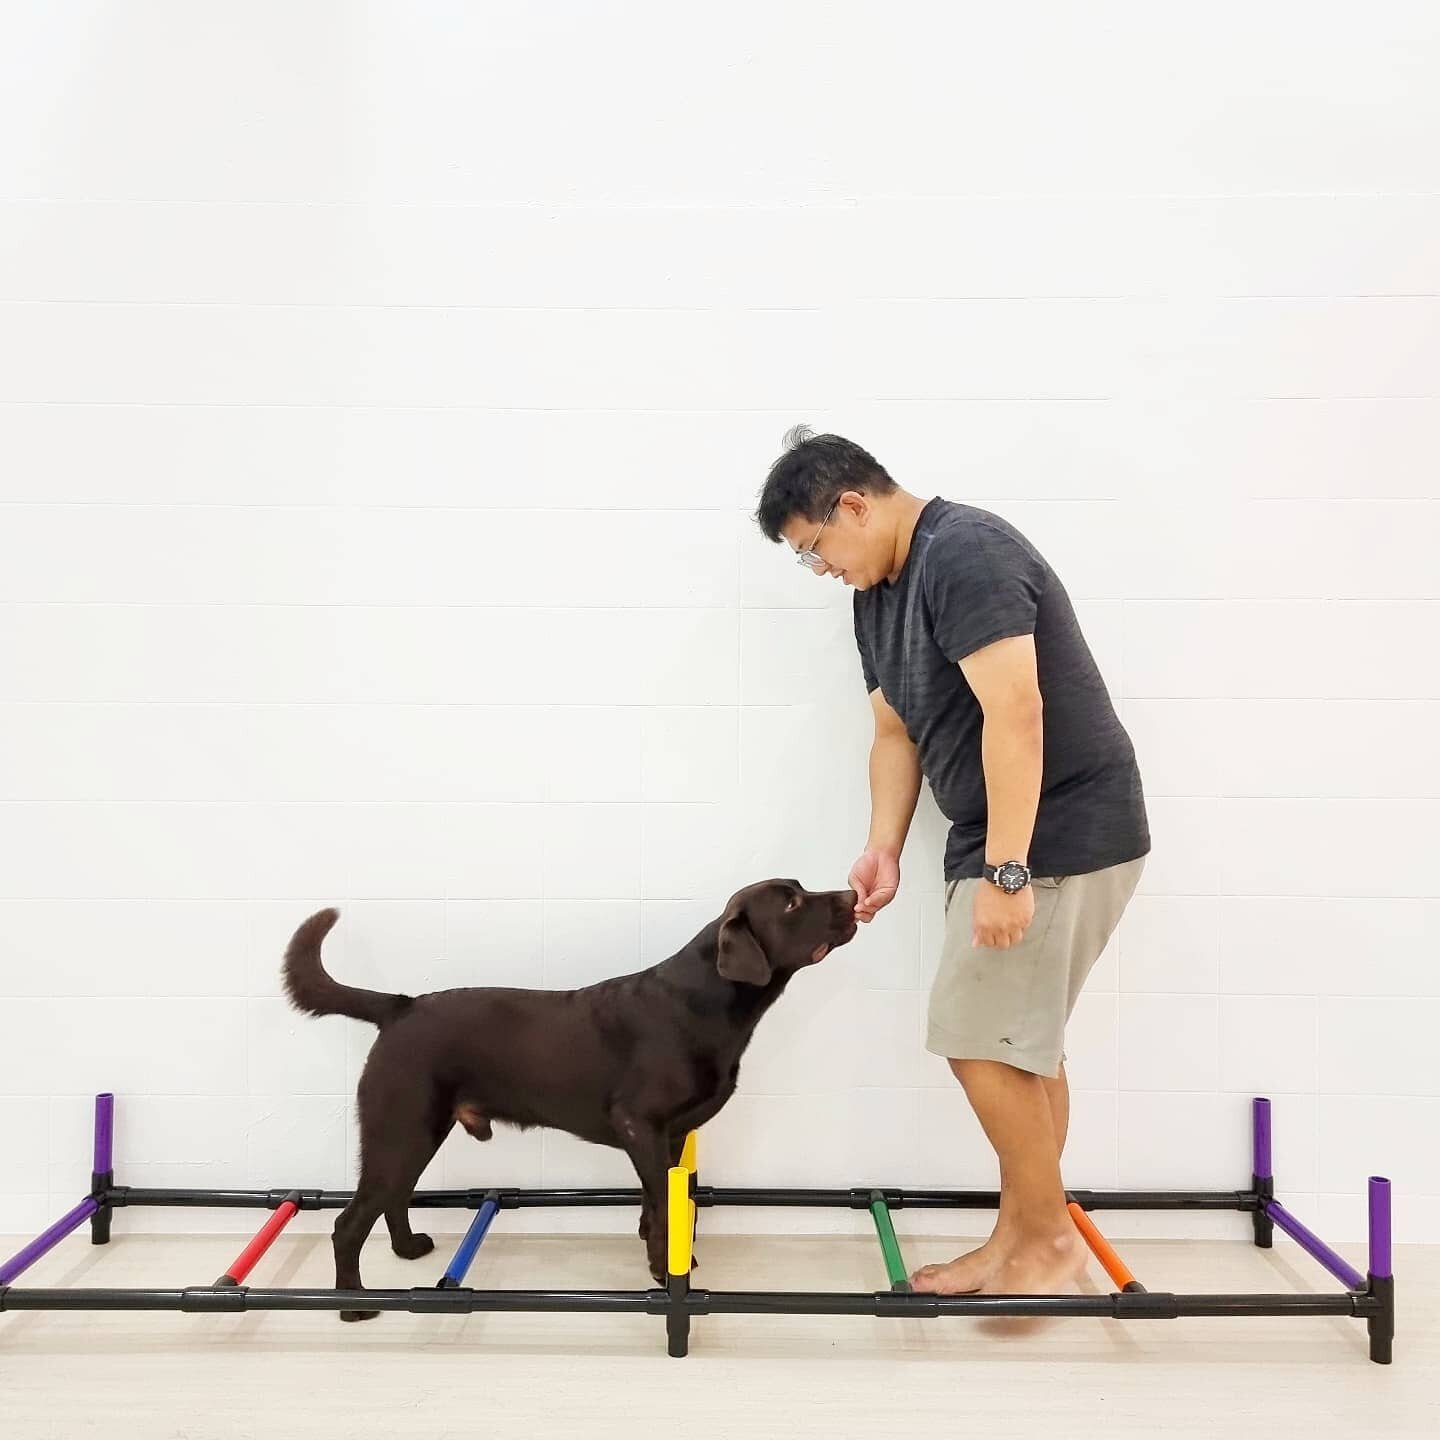 Learning never ends 😌

Thanks Ralph from @fidospawpose for imparting your knowledge and skills so that our pups will have a greater experience during fitness class! Learning is always fun when you have an awesome teacher 💛 

&amp; thanks model pinn